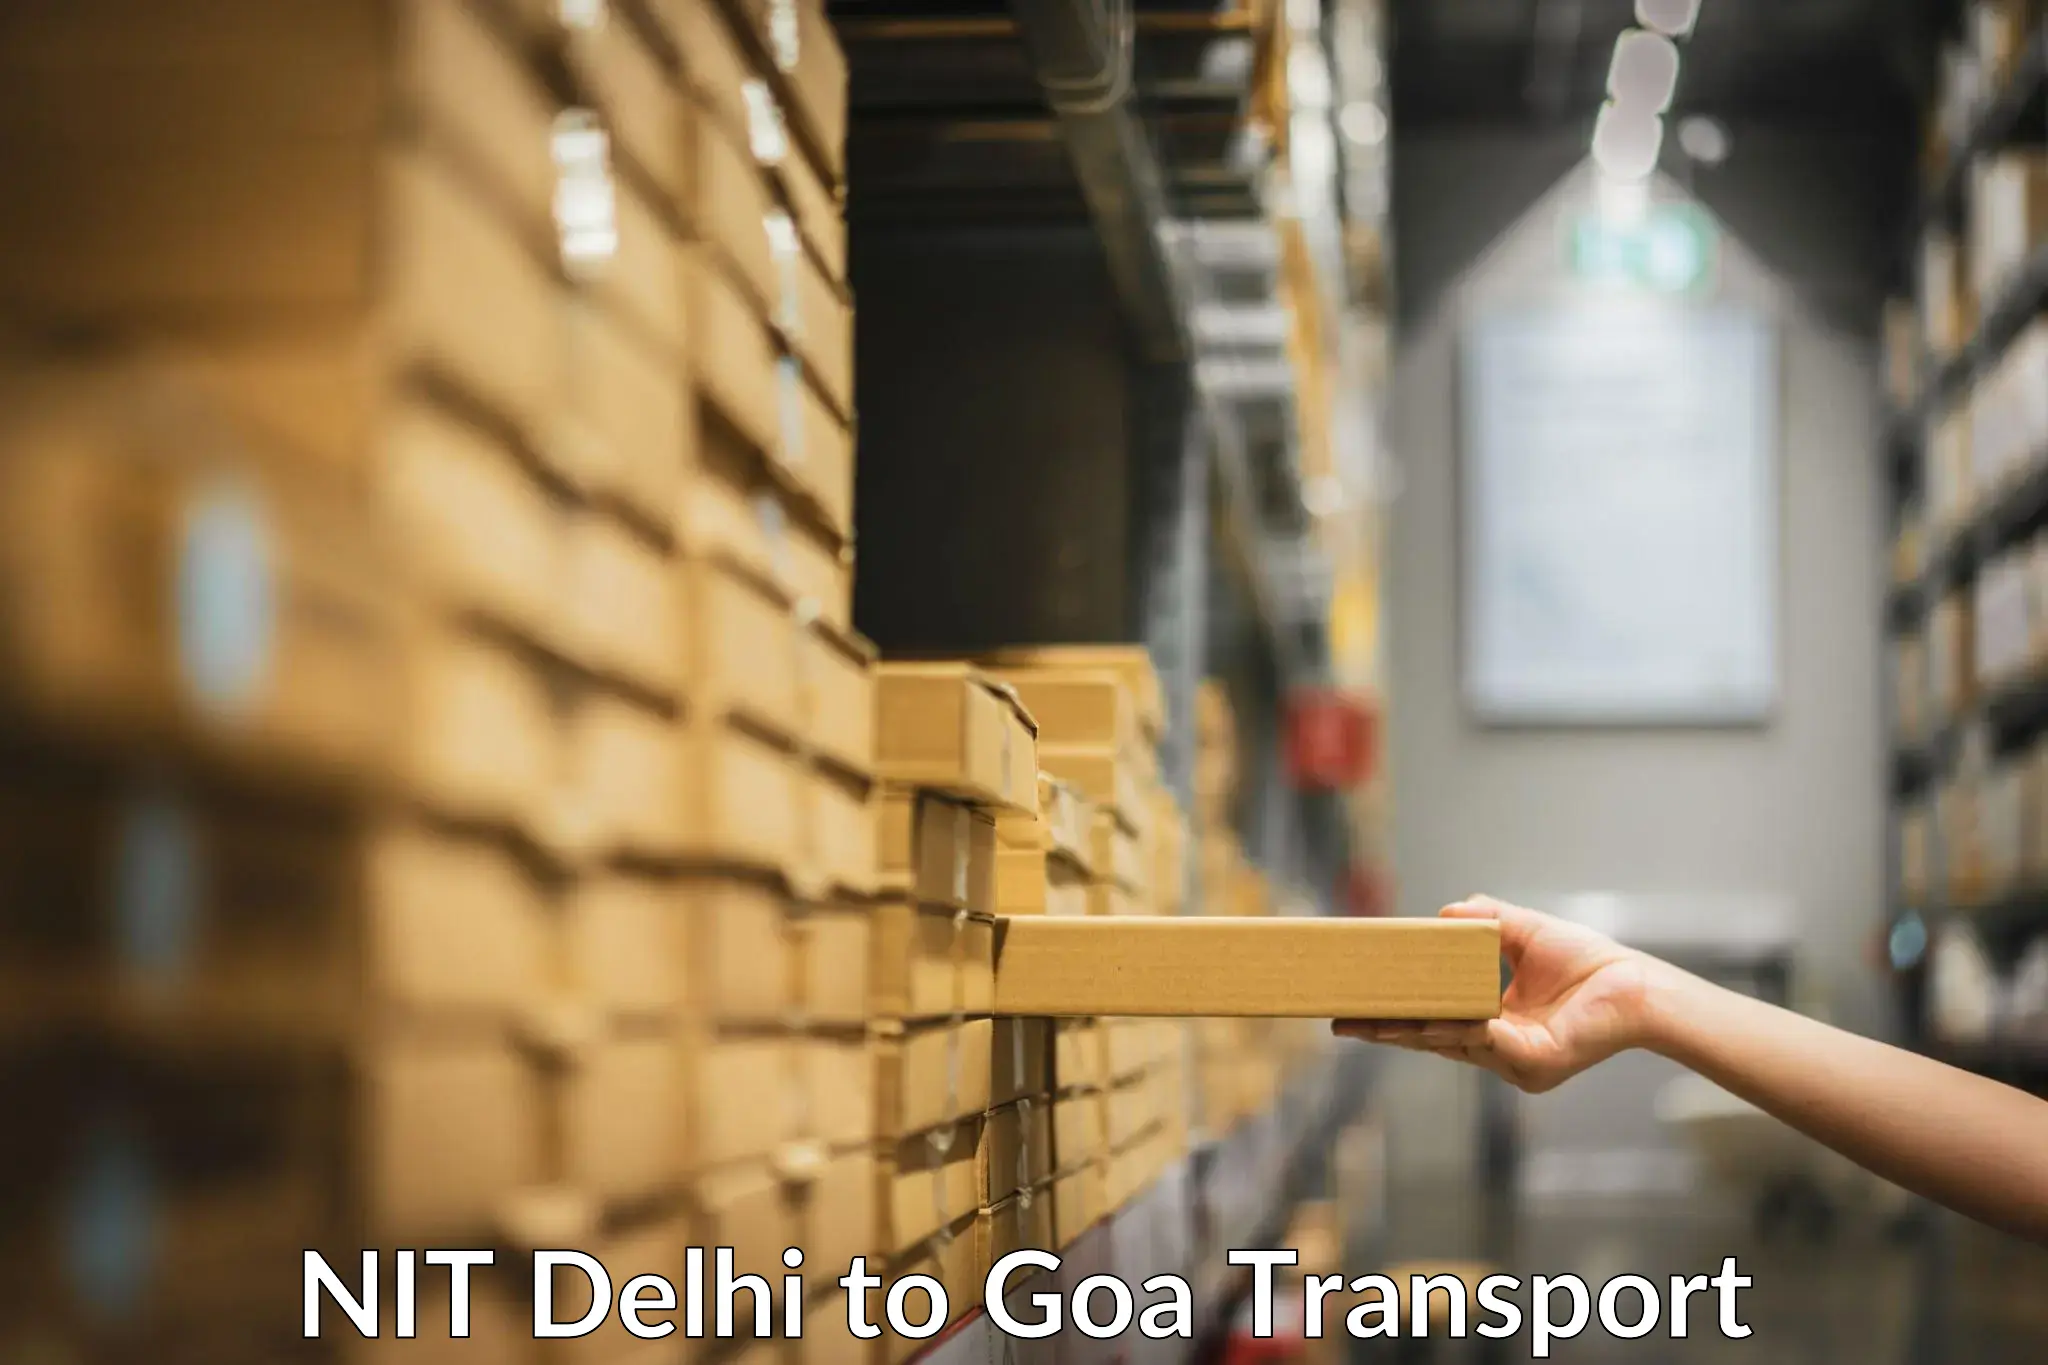 Container transport service NIT Delhi to Panjim